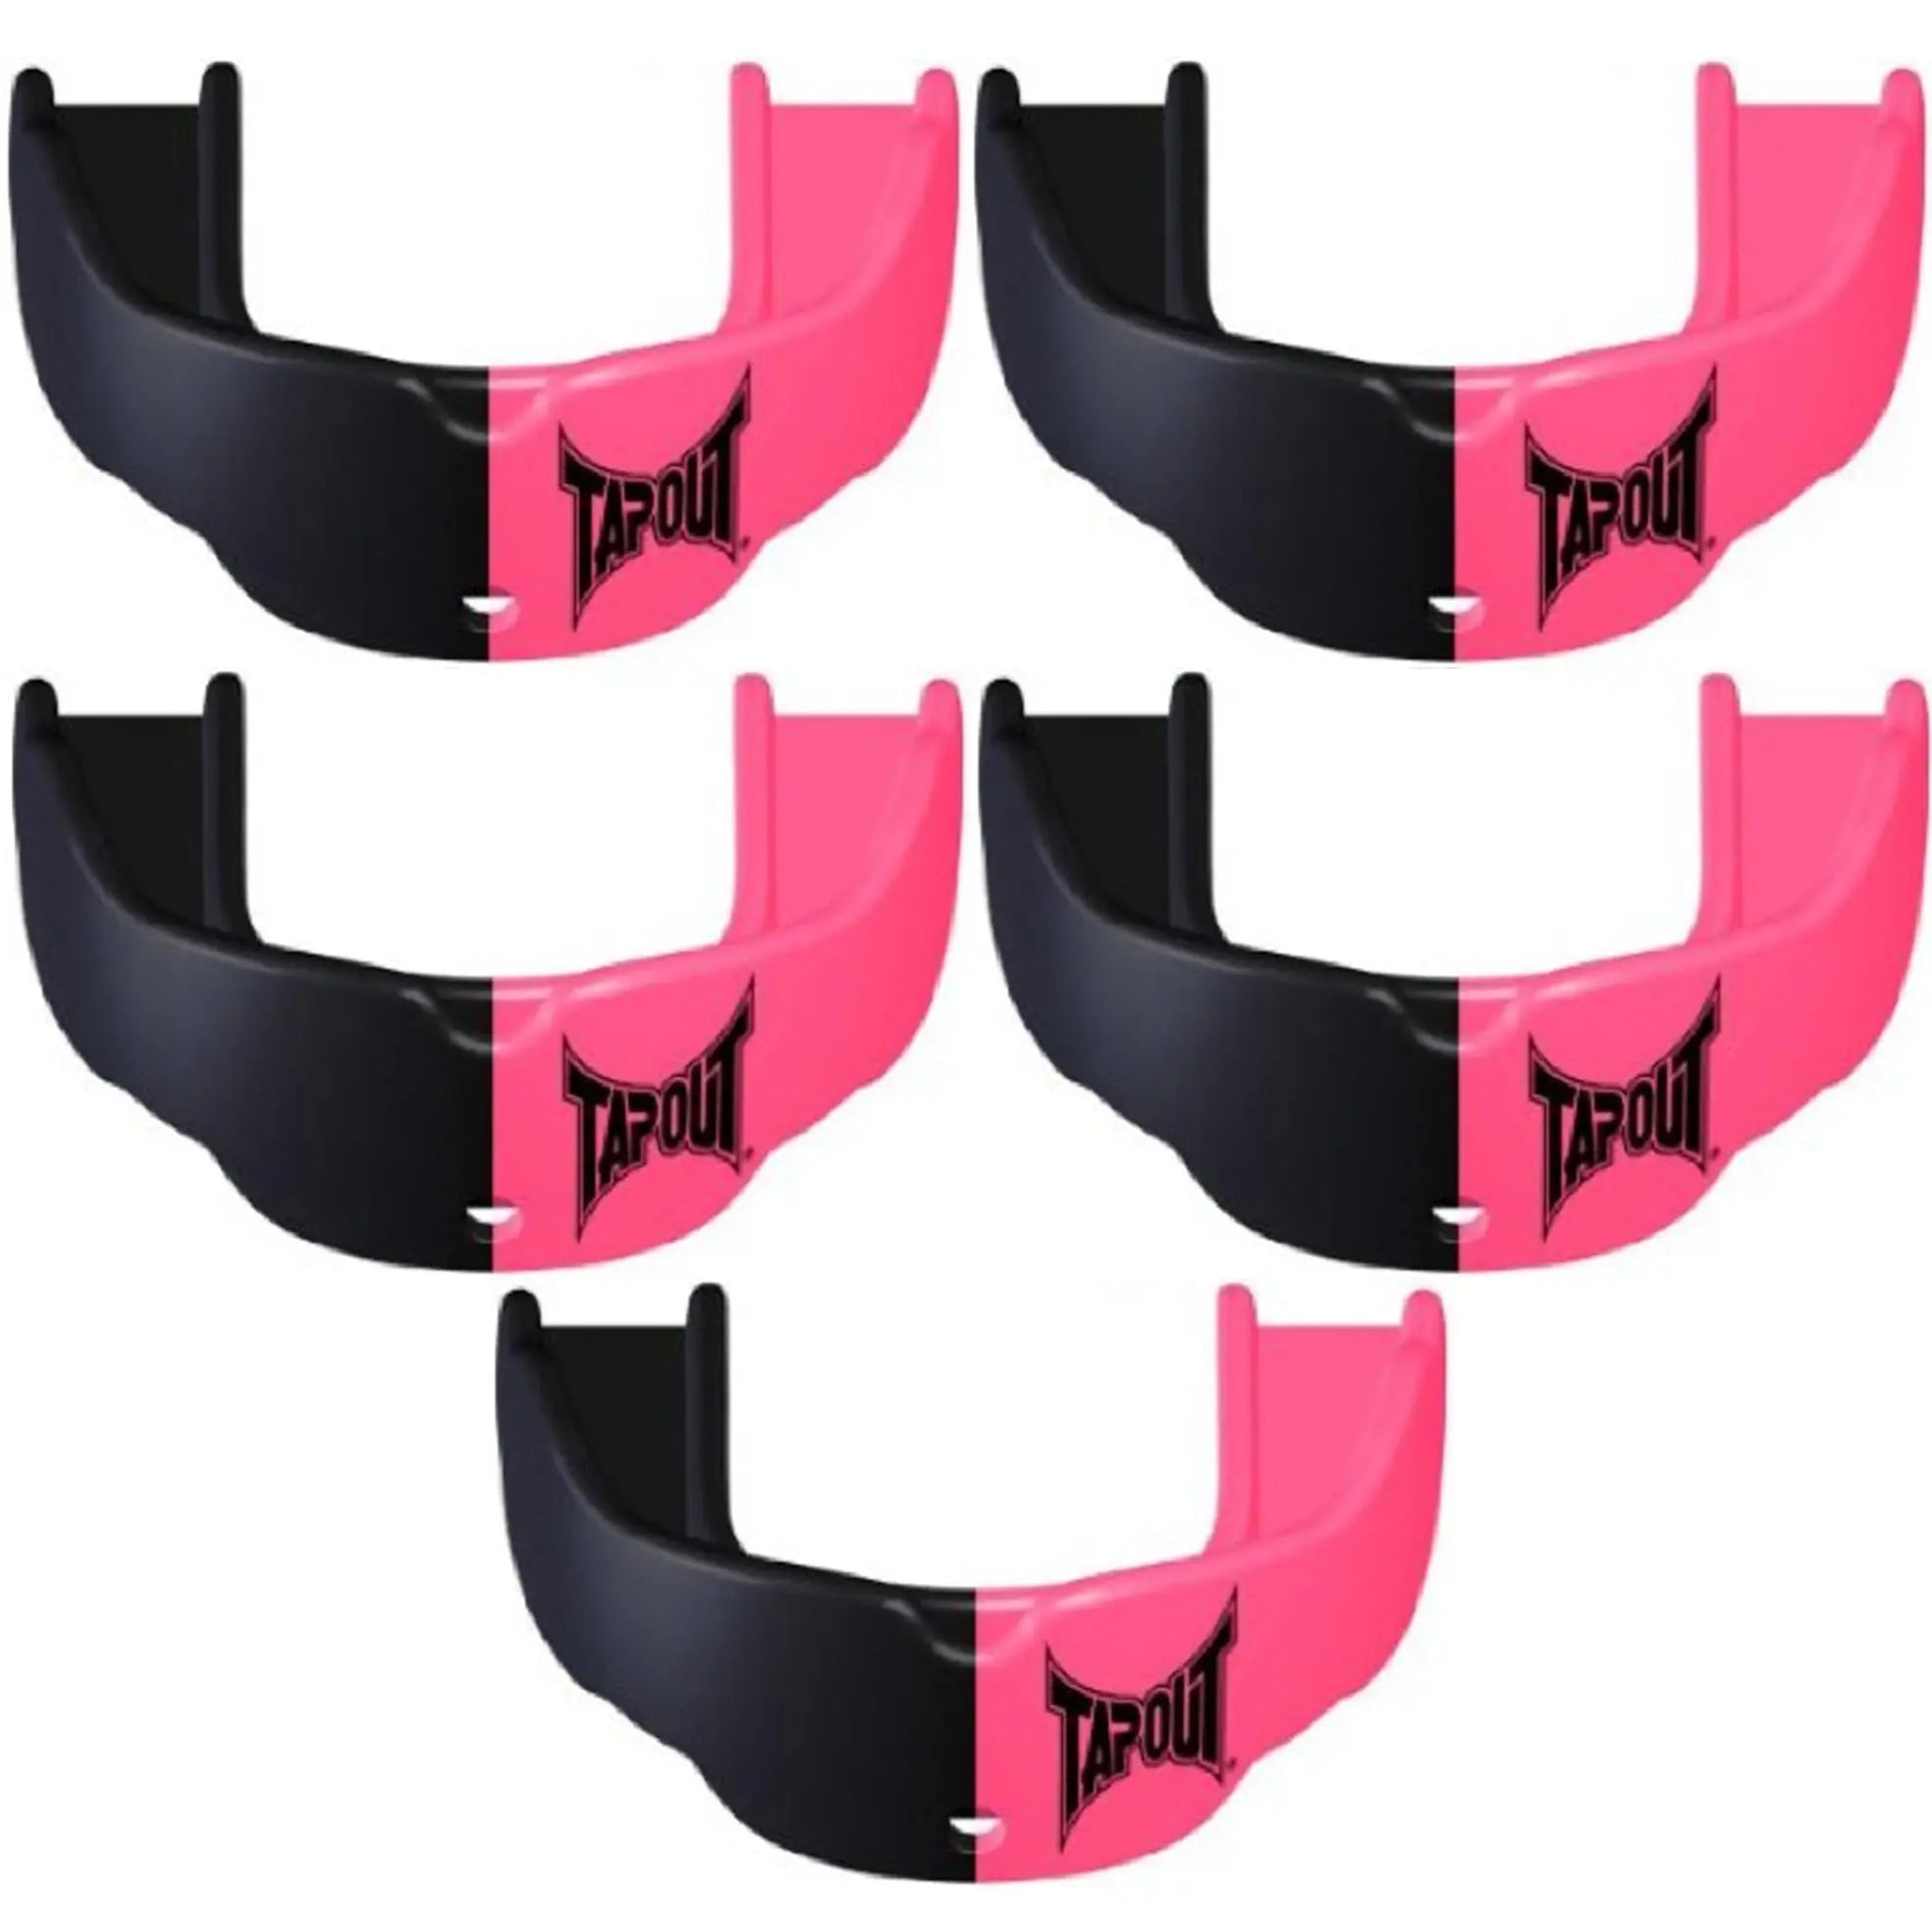 Tapout Adult Protective Sports Mouthguard with Strap 5-Pack - Pink/Black Tapout